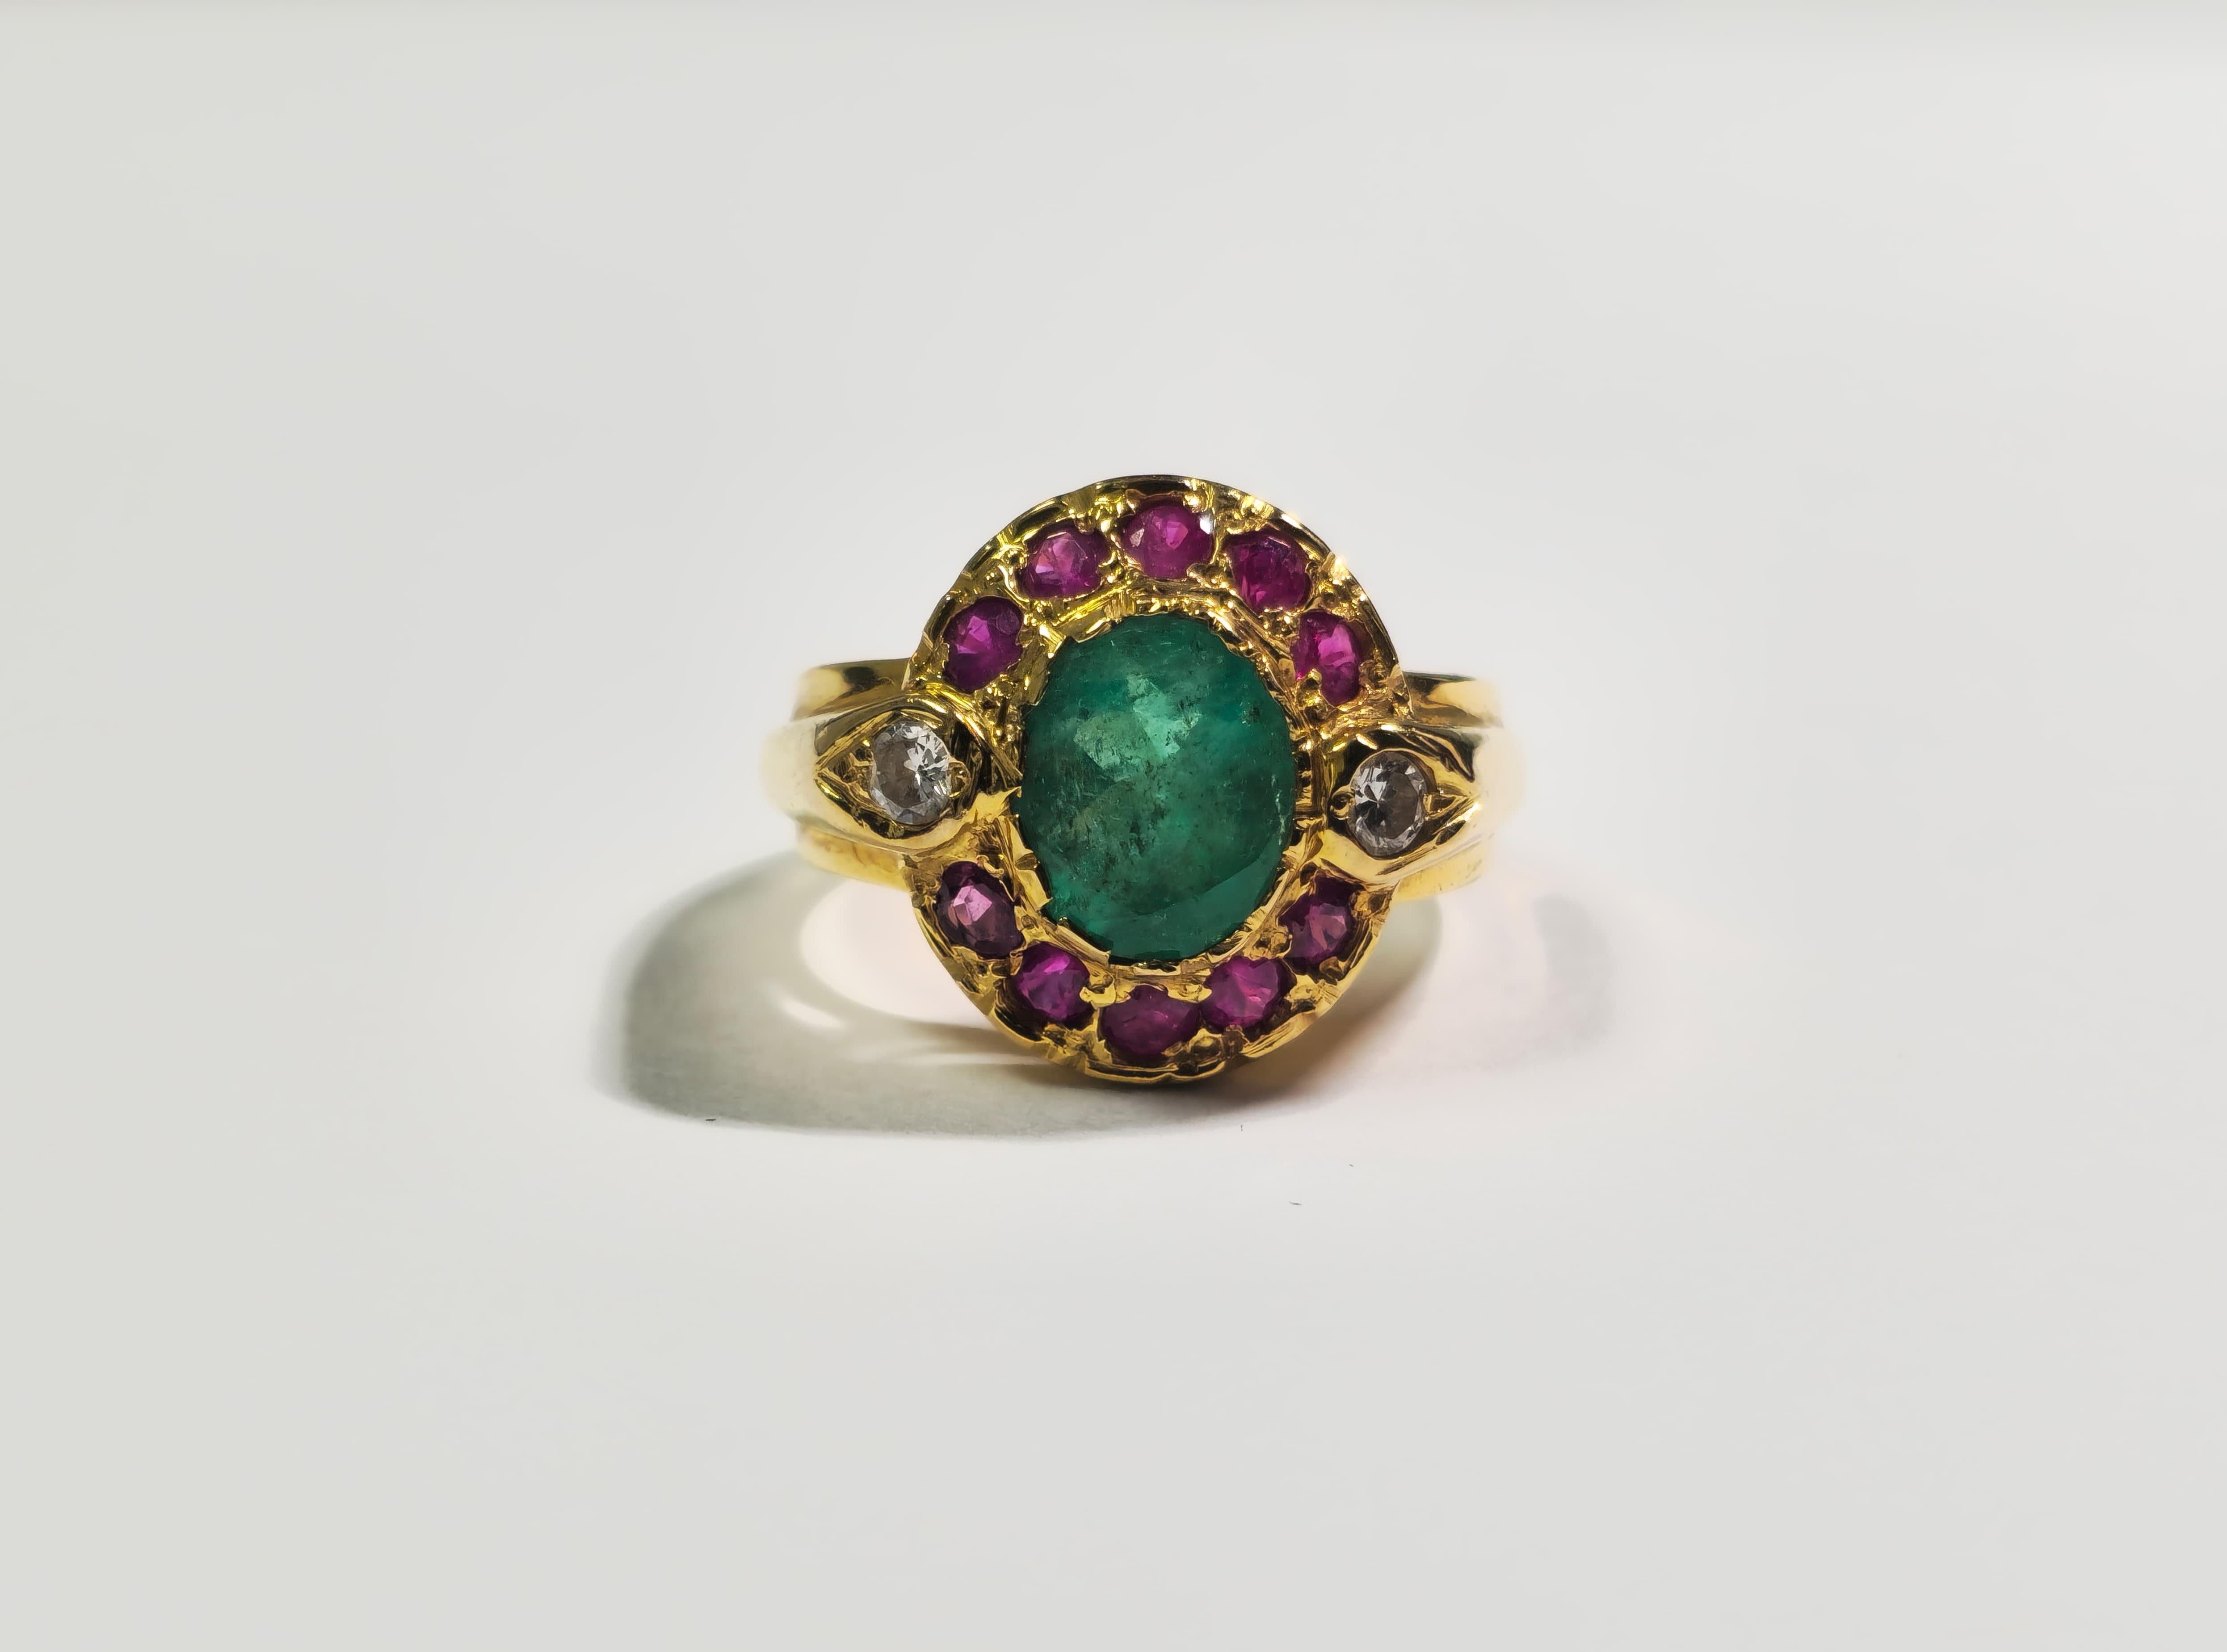 Weighing 10.2 grams and crafted from 18k gold, this ring showcases a stunning 2.4ct emerald, 0.90cwt ruby, and 0.15cwt diamond with SI1 clarity and G color. Sized for US 6.50, it offers exceptional elegance. Enjoy our ring resizing service for a